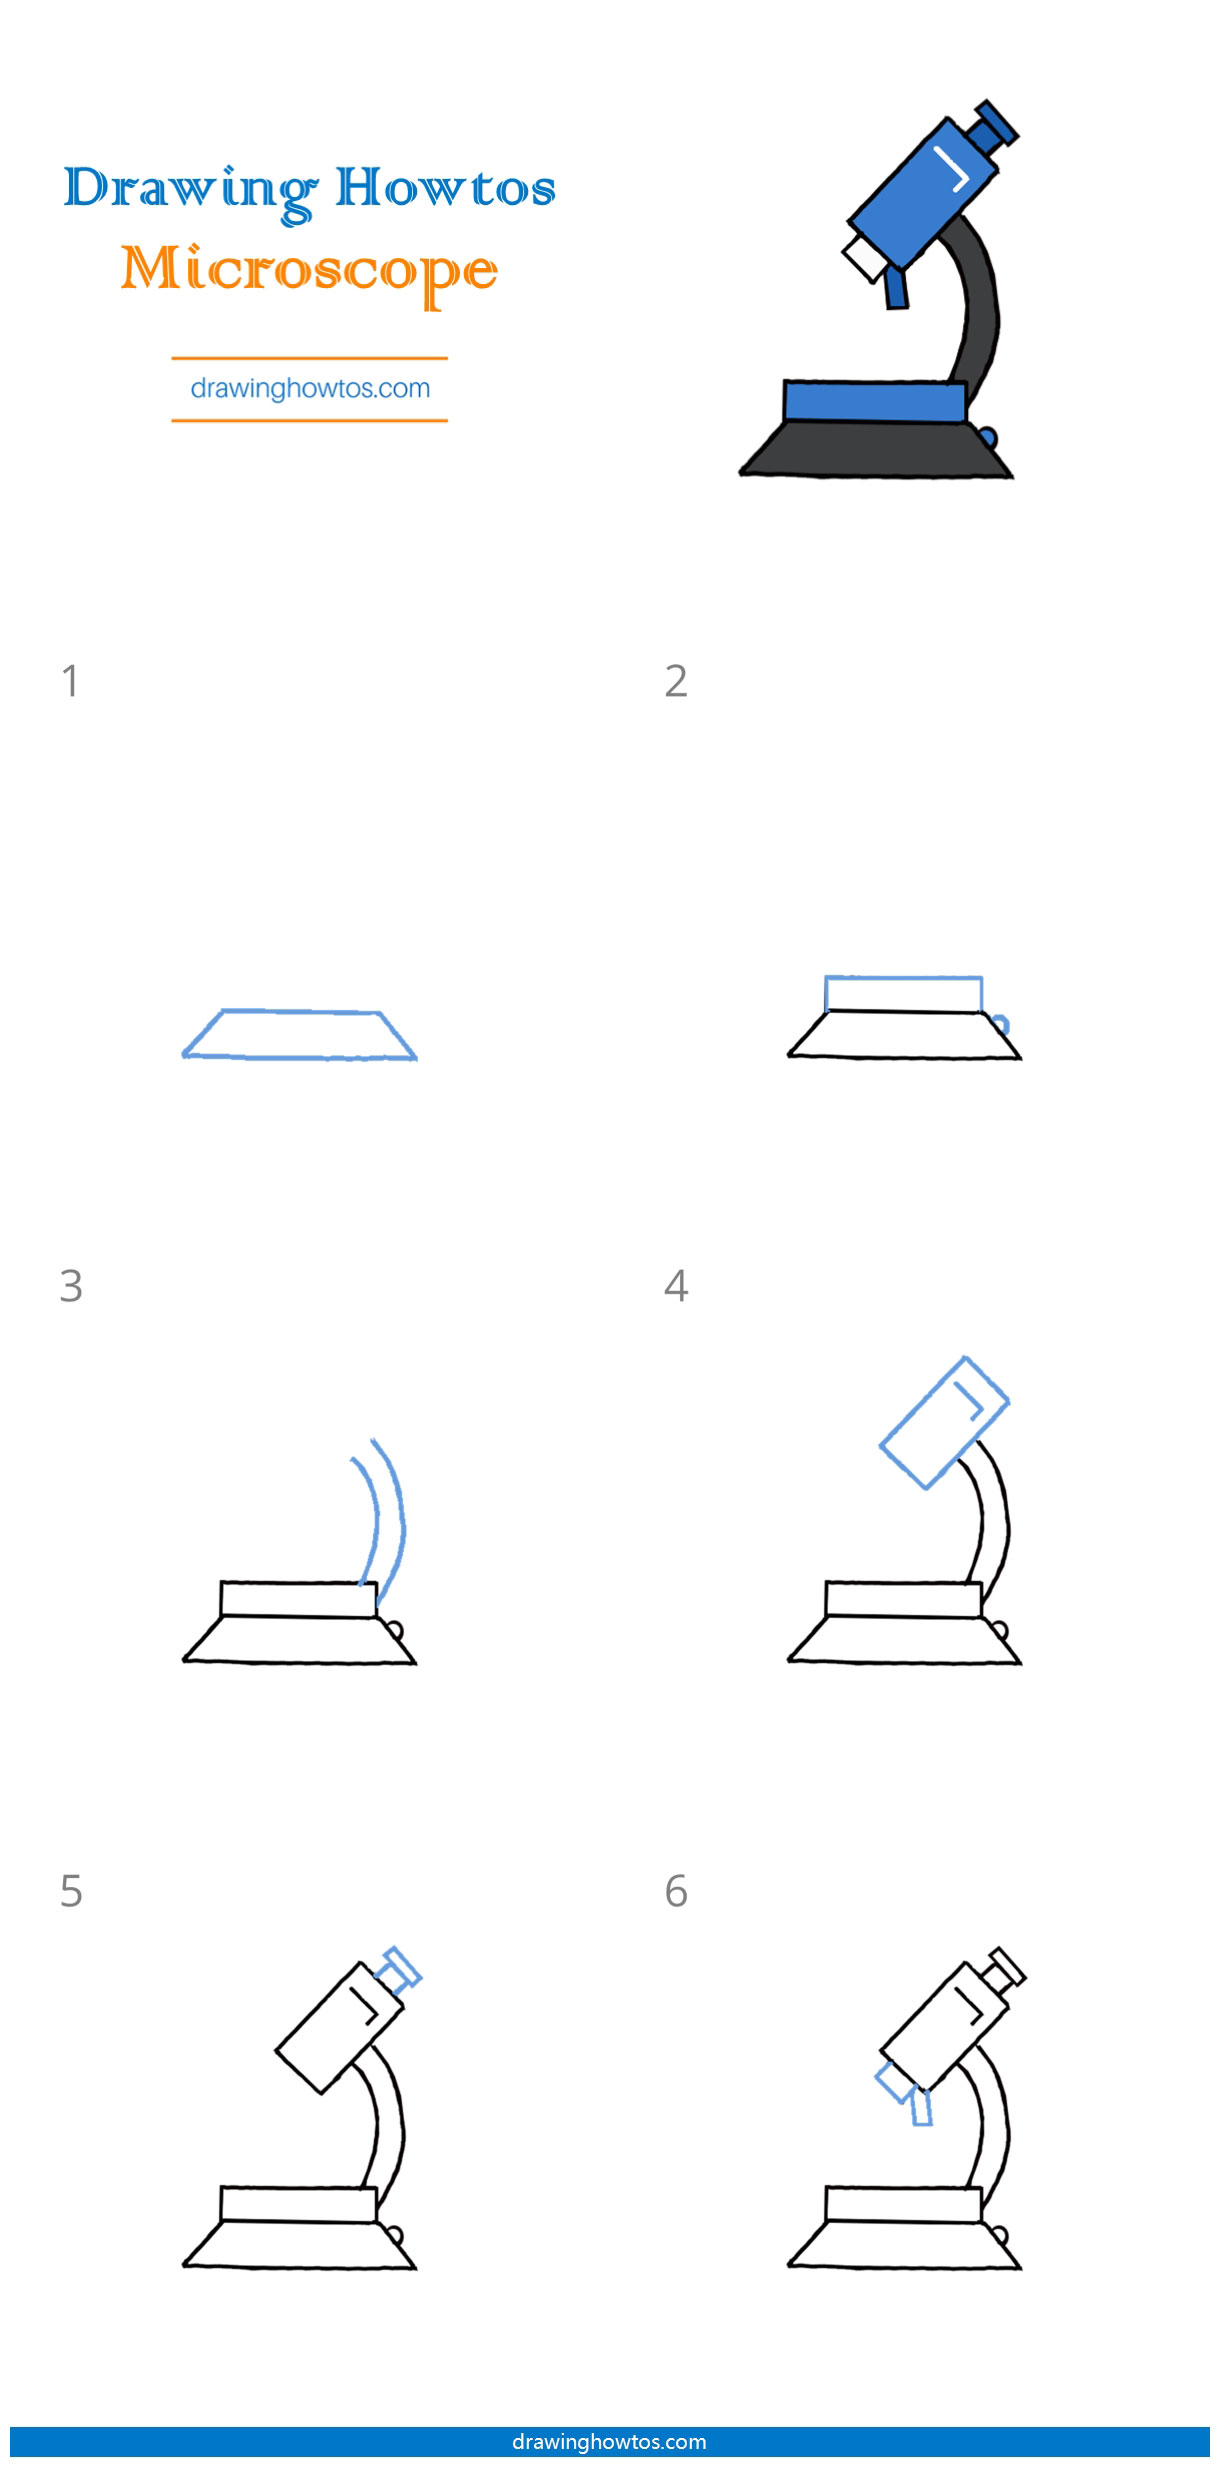 How to Draw a Microscope Step by Step